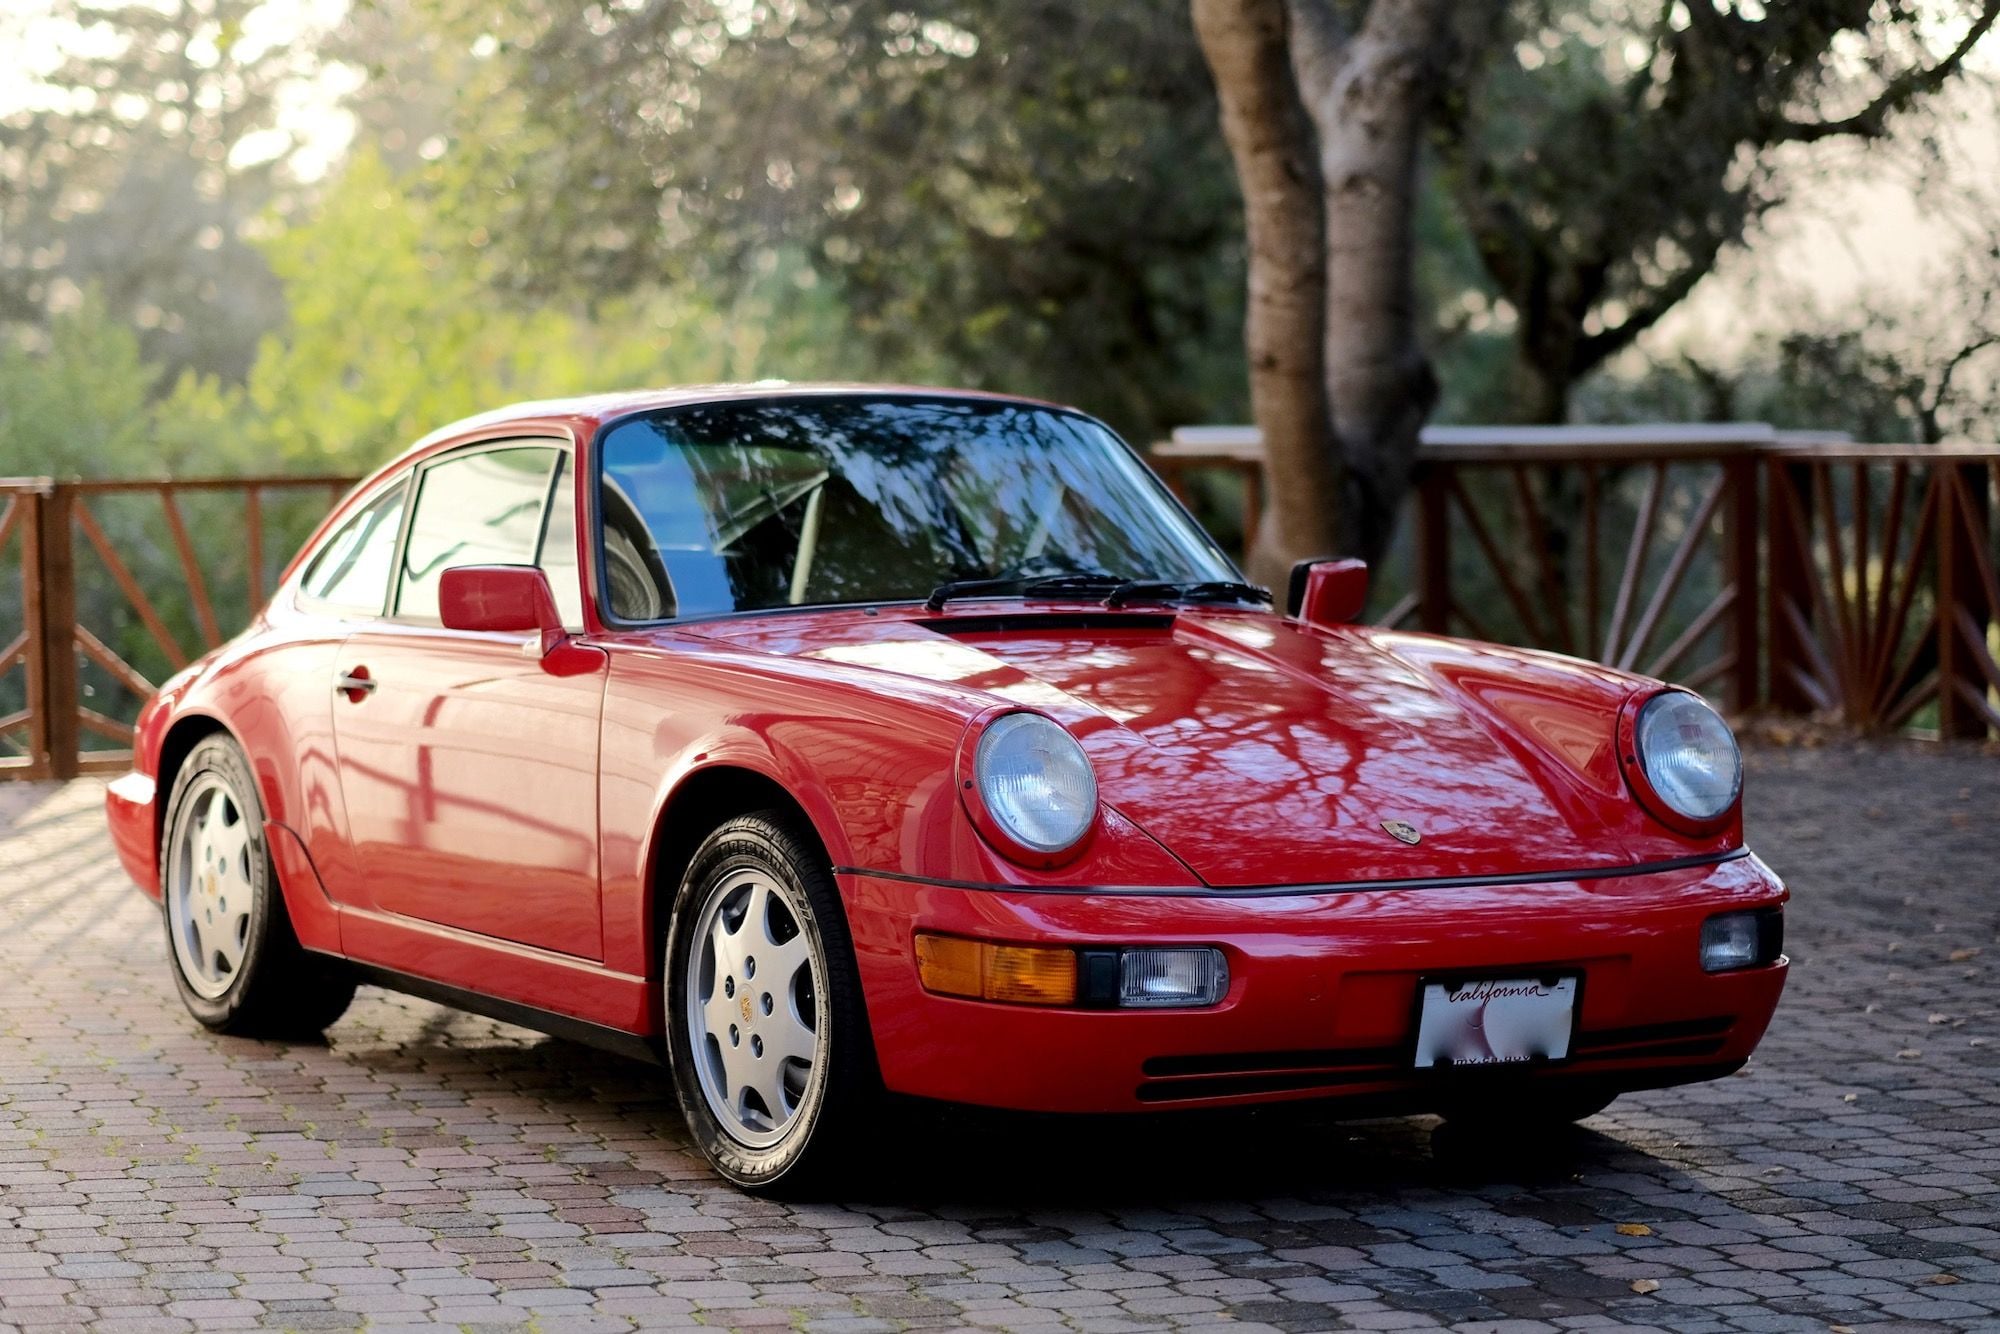 1991 Porsche 911 - 1991 Porsche 964 Tiptronic - Used - VIN WP0AB2968MS410346 - 95,600 Miles - 6 cyl - 2WD - Automatic - Coupe - Red - San Jose, CA 95033, United States